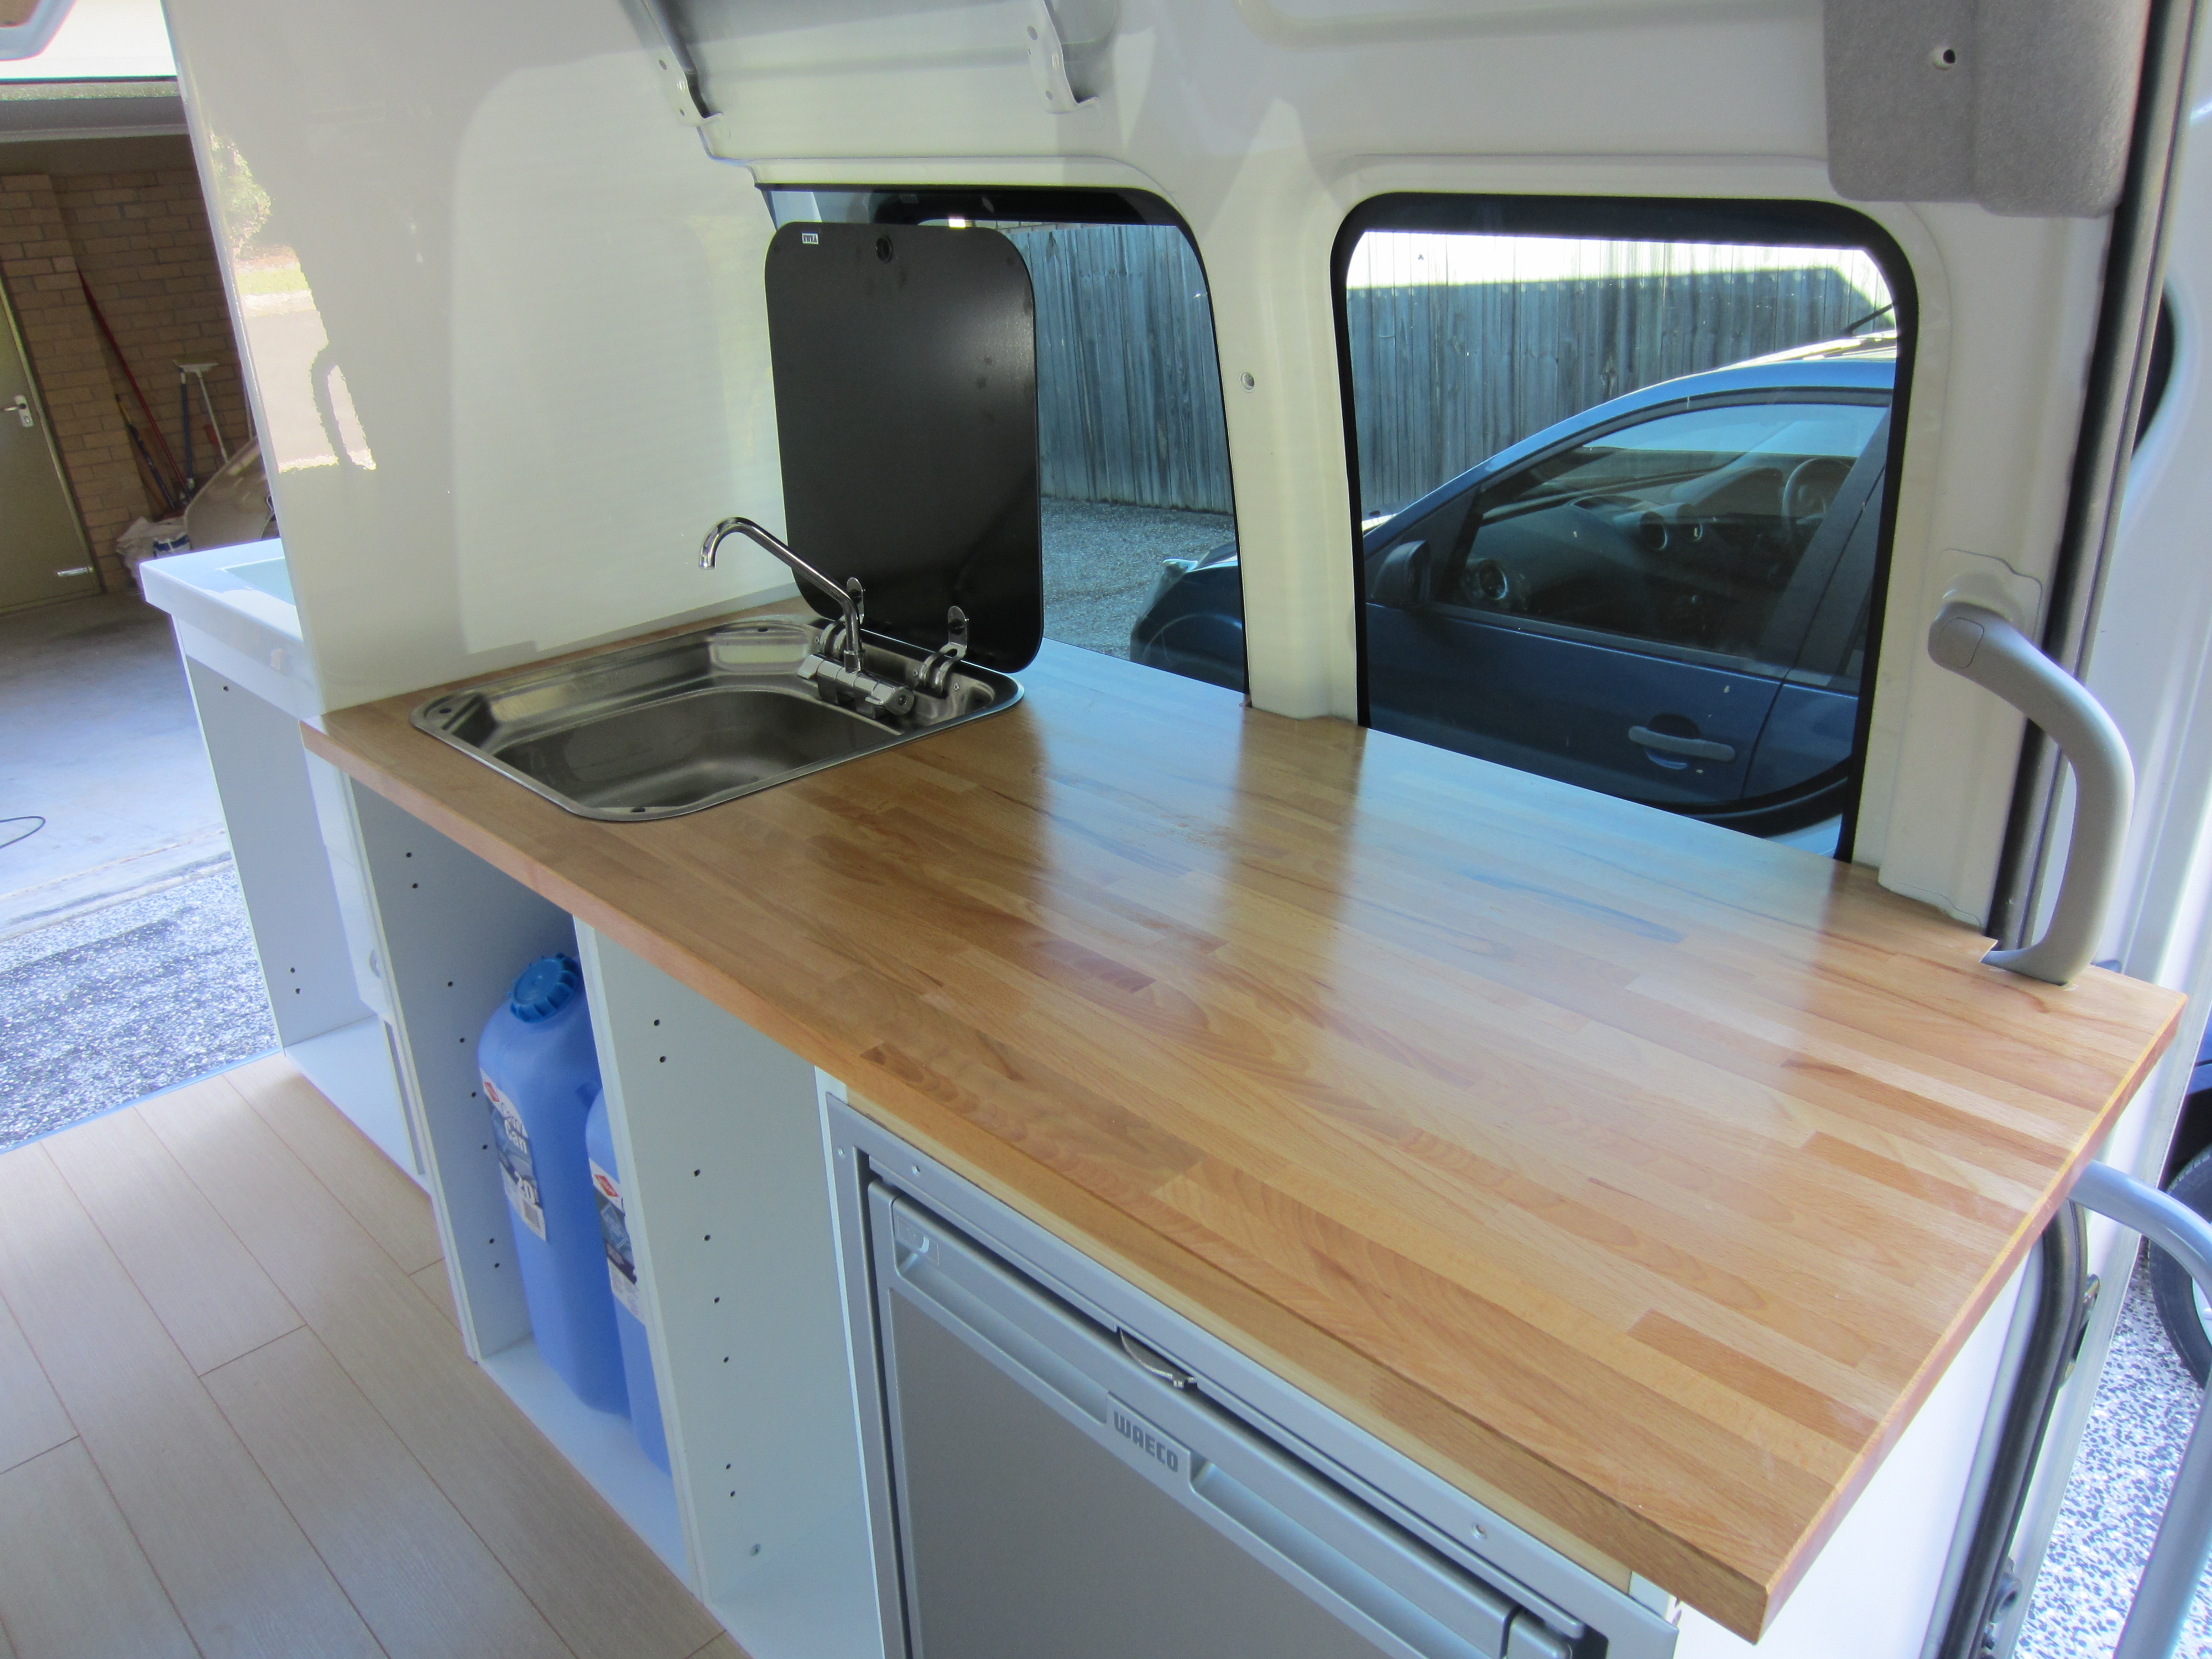 Campervan Kitchen And Cabinets The Campervan Converts